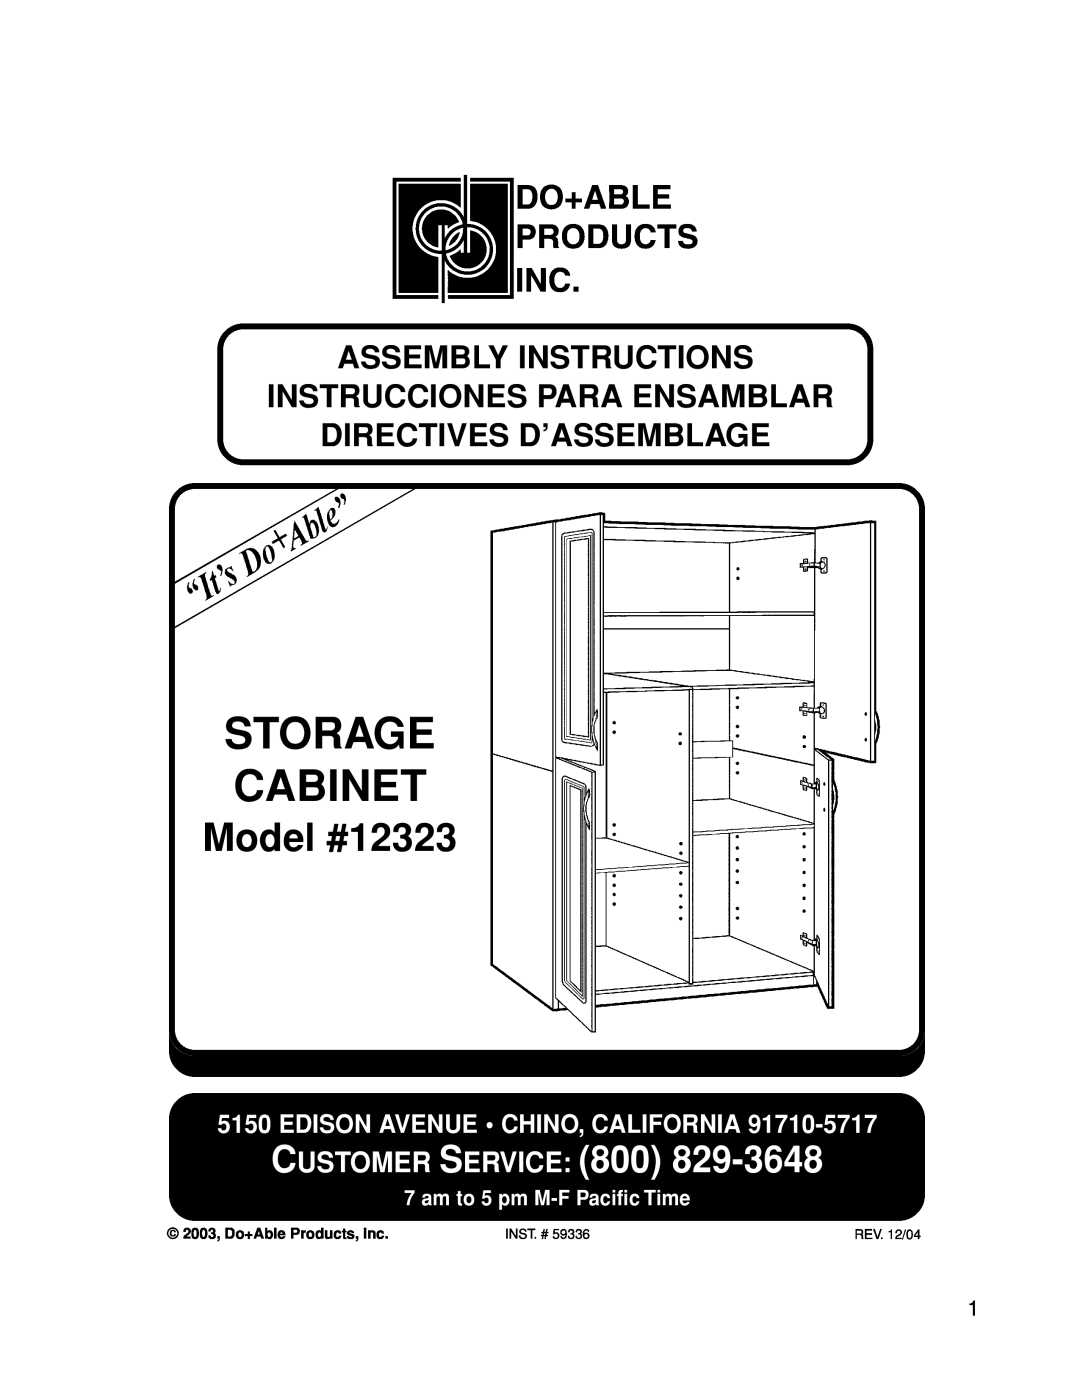 Closet Maid manual 2003, Do+Able Products, Inc, Storage Cabinet, Model #12323, Customer Service, Assembly Instructions 